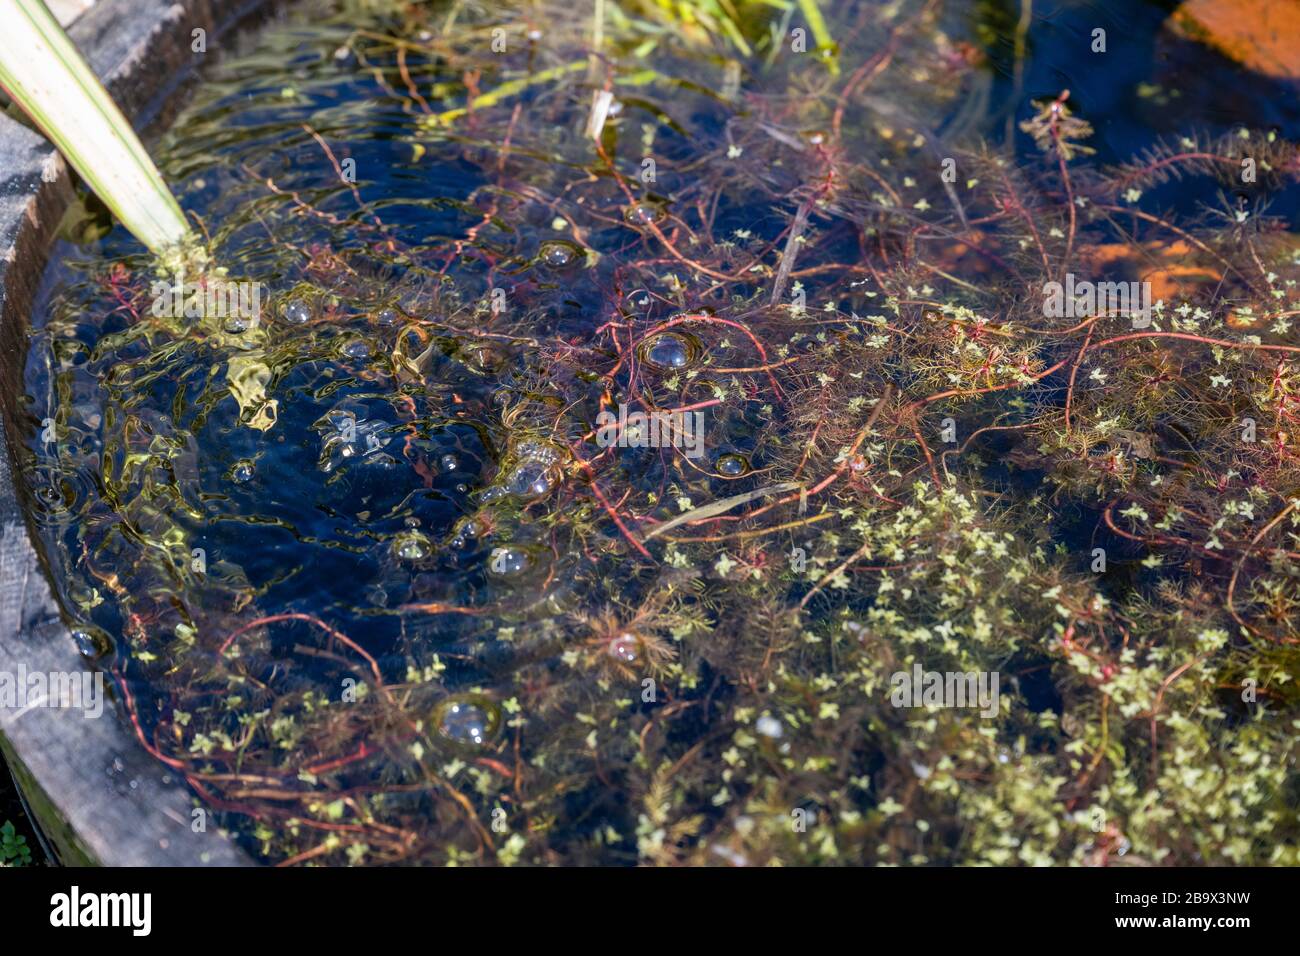 Looking down into the clear water in a half barrel pond filled with a mass of pond weed with bubbles coming up through the weed. Stock Photo